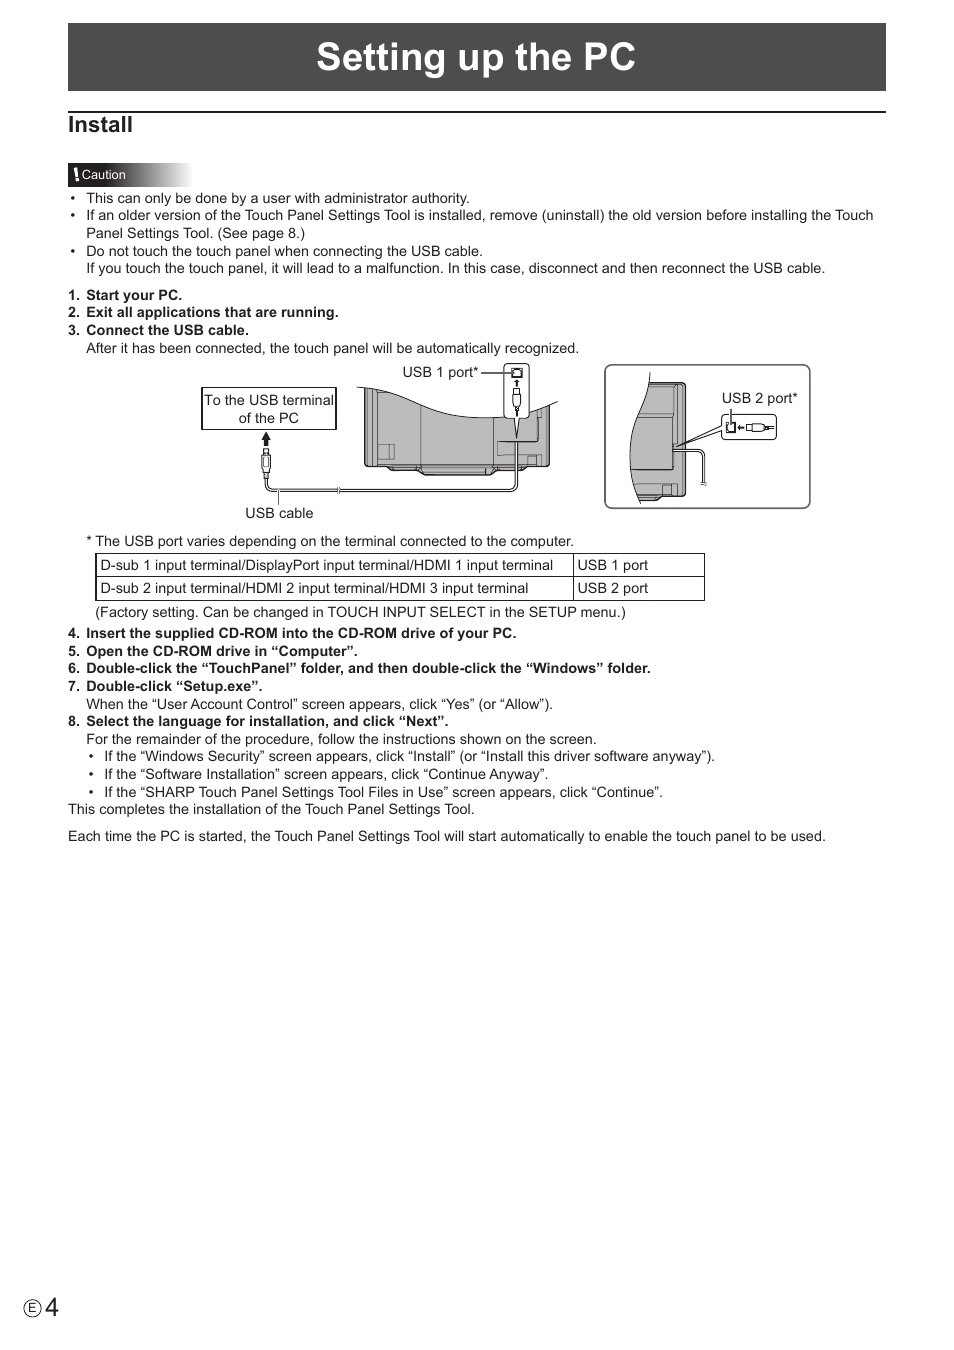 Setting up the pc, Install | Sharp PN-60TW3 User Manual | Page 4 / 9